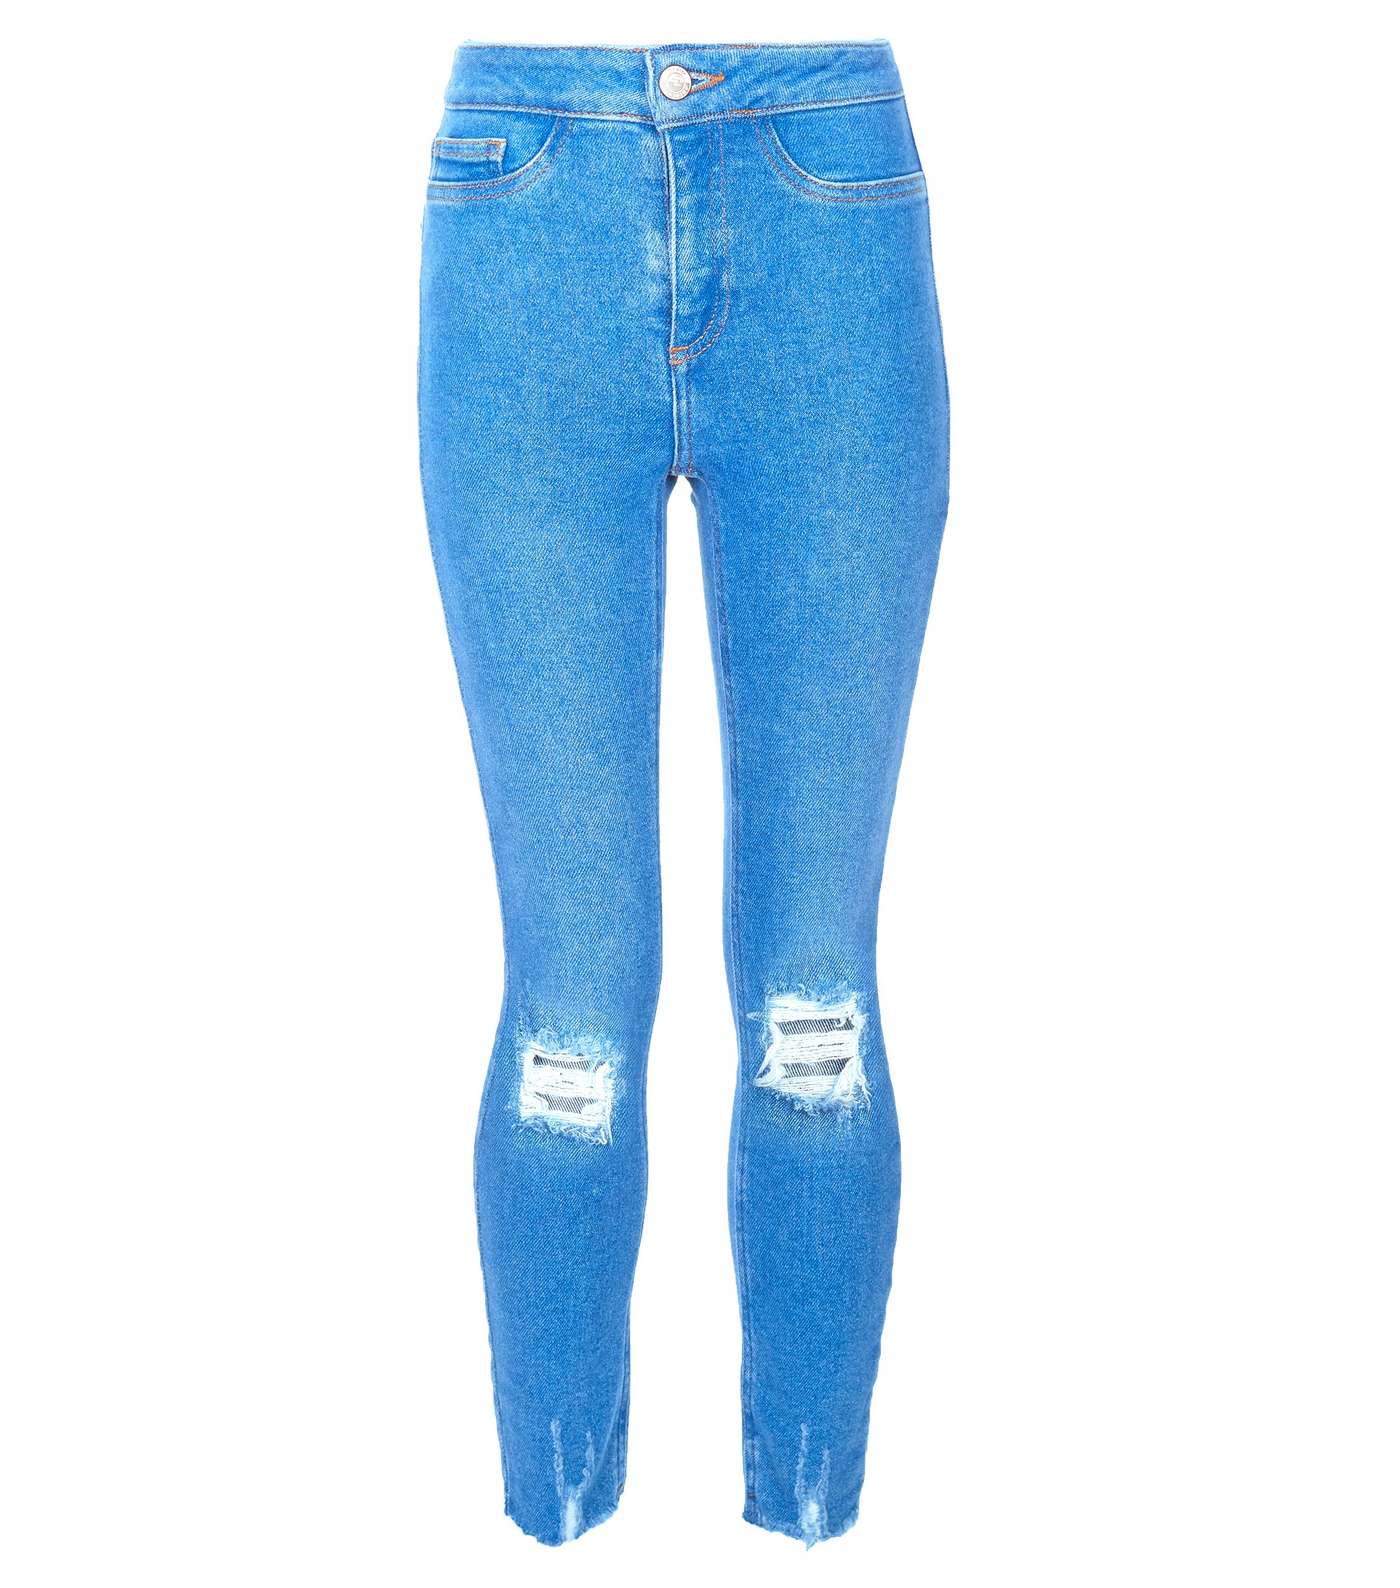 Girls Bright Blue Ripped High Waist Super Skinny Jeans Image 4